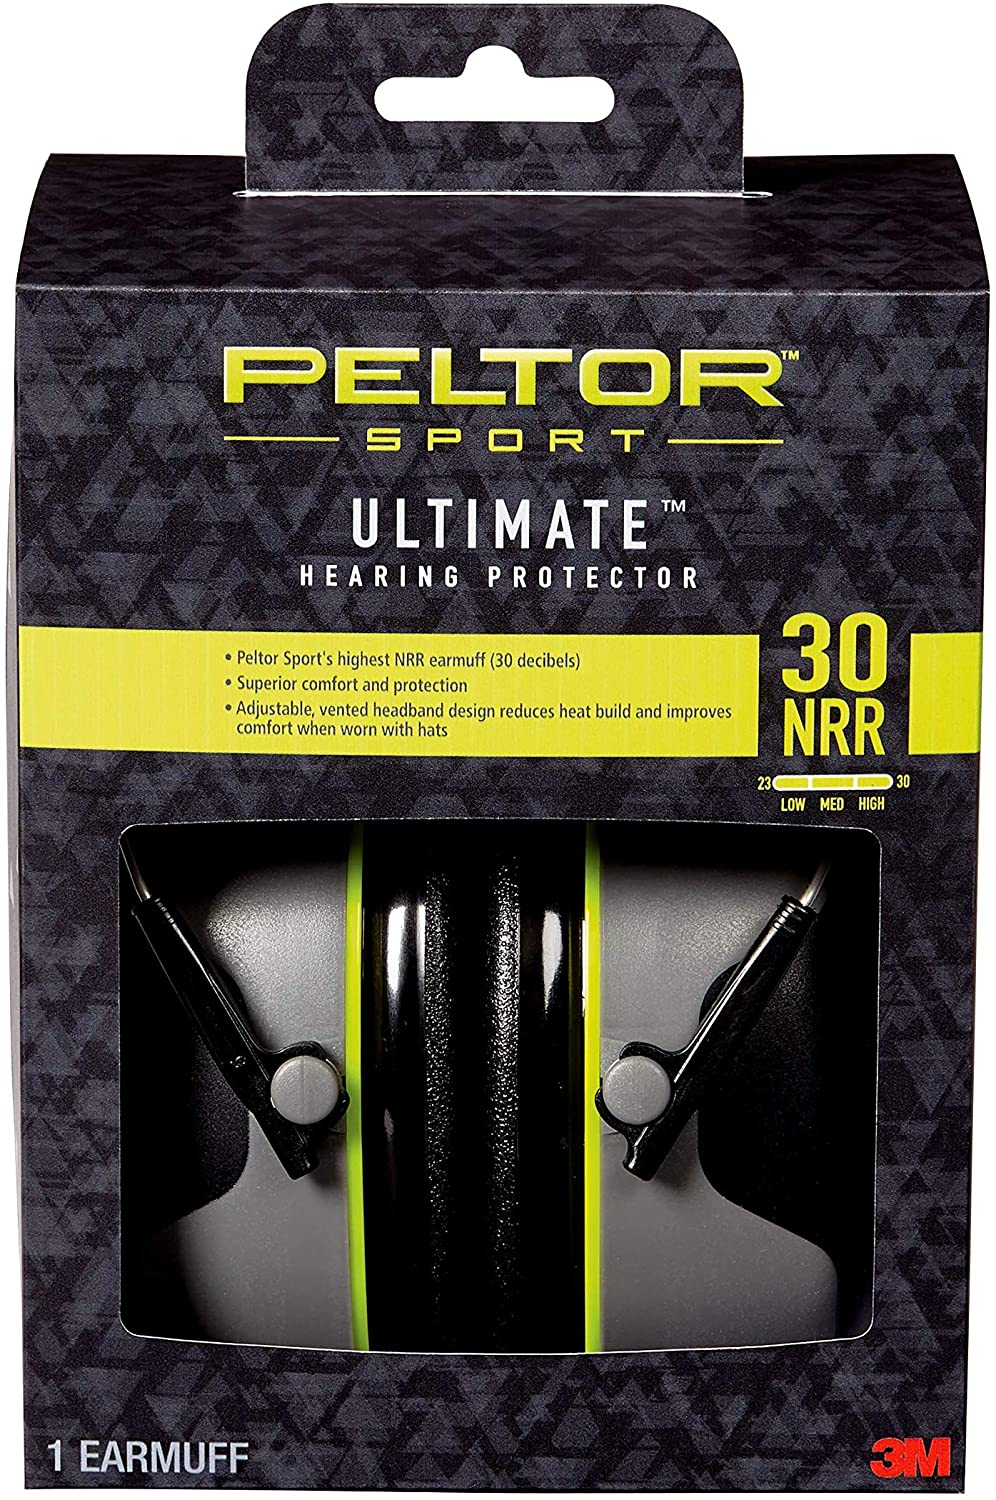 3M CHIMD Peltor Sport Tactical 500 Smart Electronic Hearing Protector with  Bluetooth Technology, NRR 26 dB, Ideal for the Range, Shooting and Hunting,  TAC500-OTH Peltor Sport Tac 500 Lazada PH